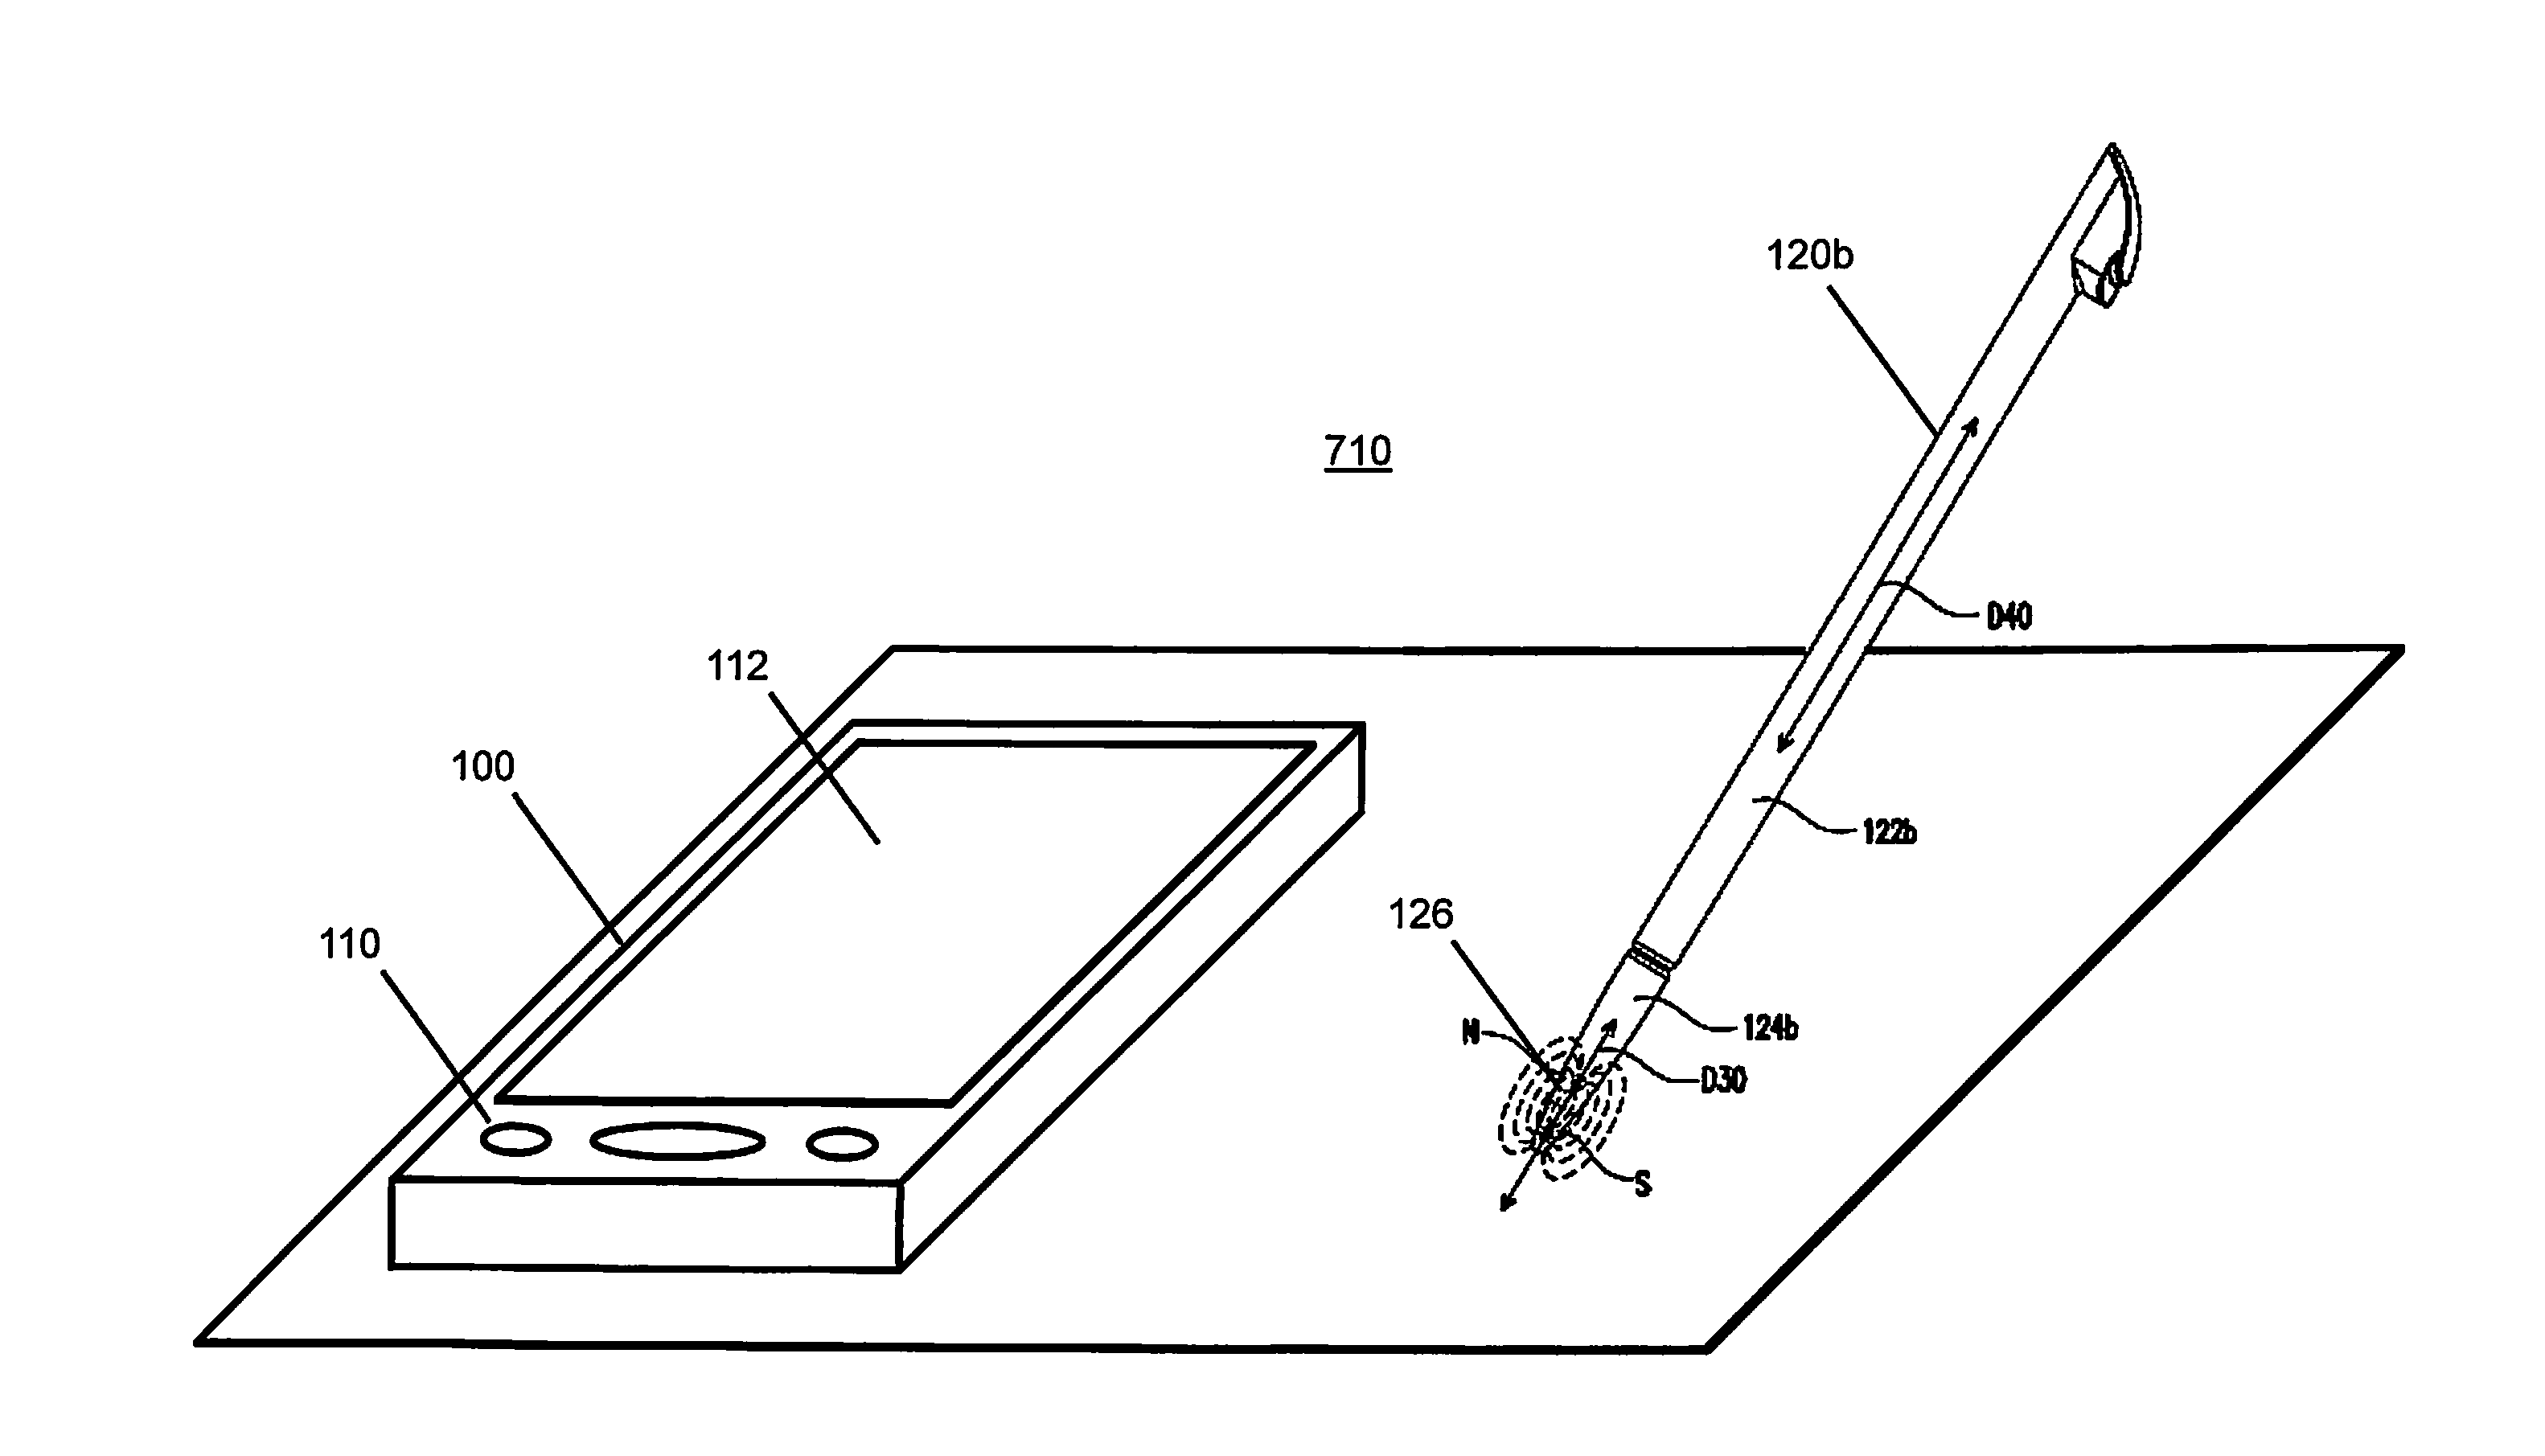 Magnetic Vector Sensor Positioning and Communications System